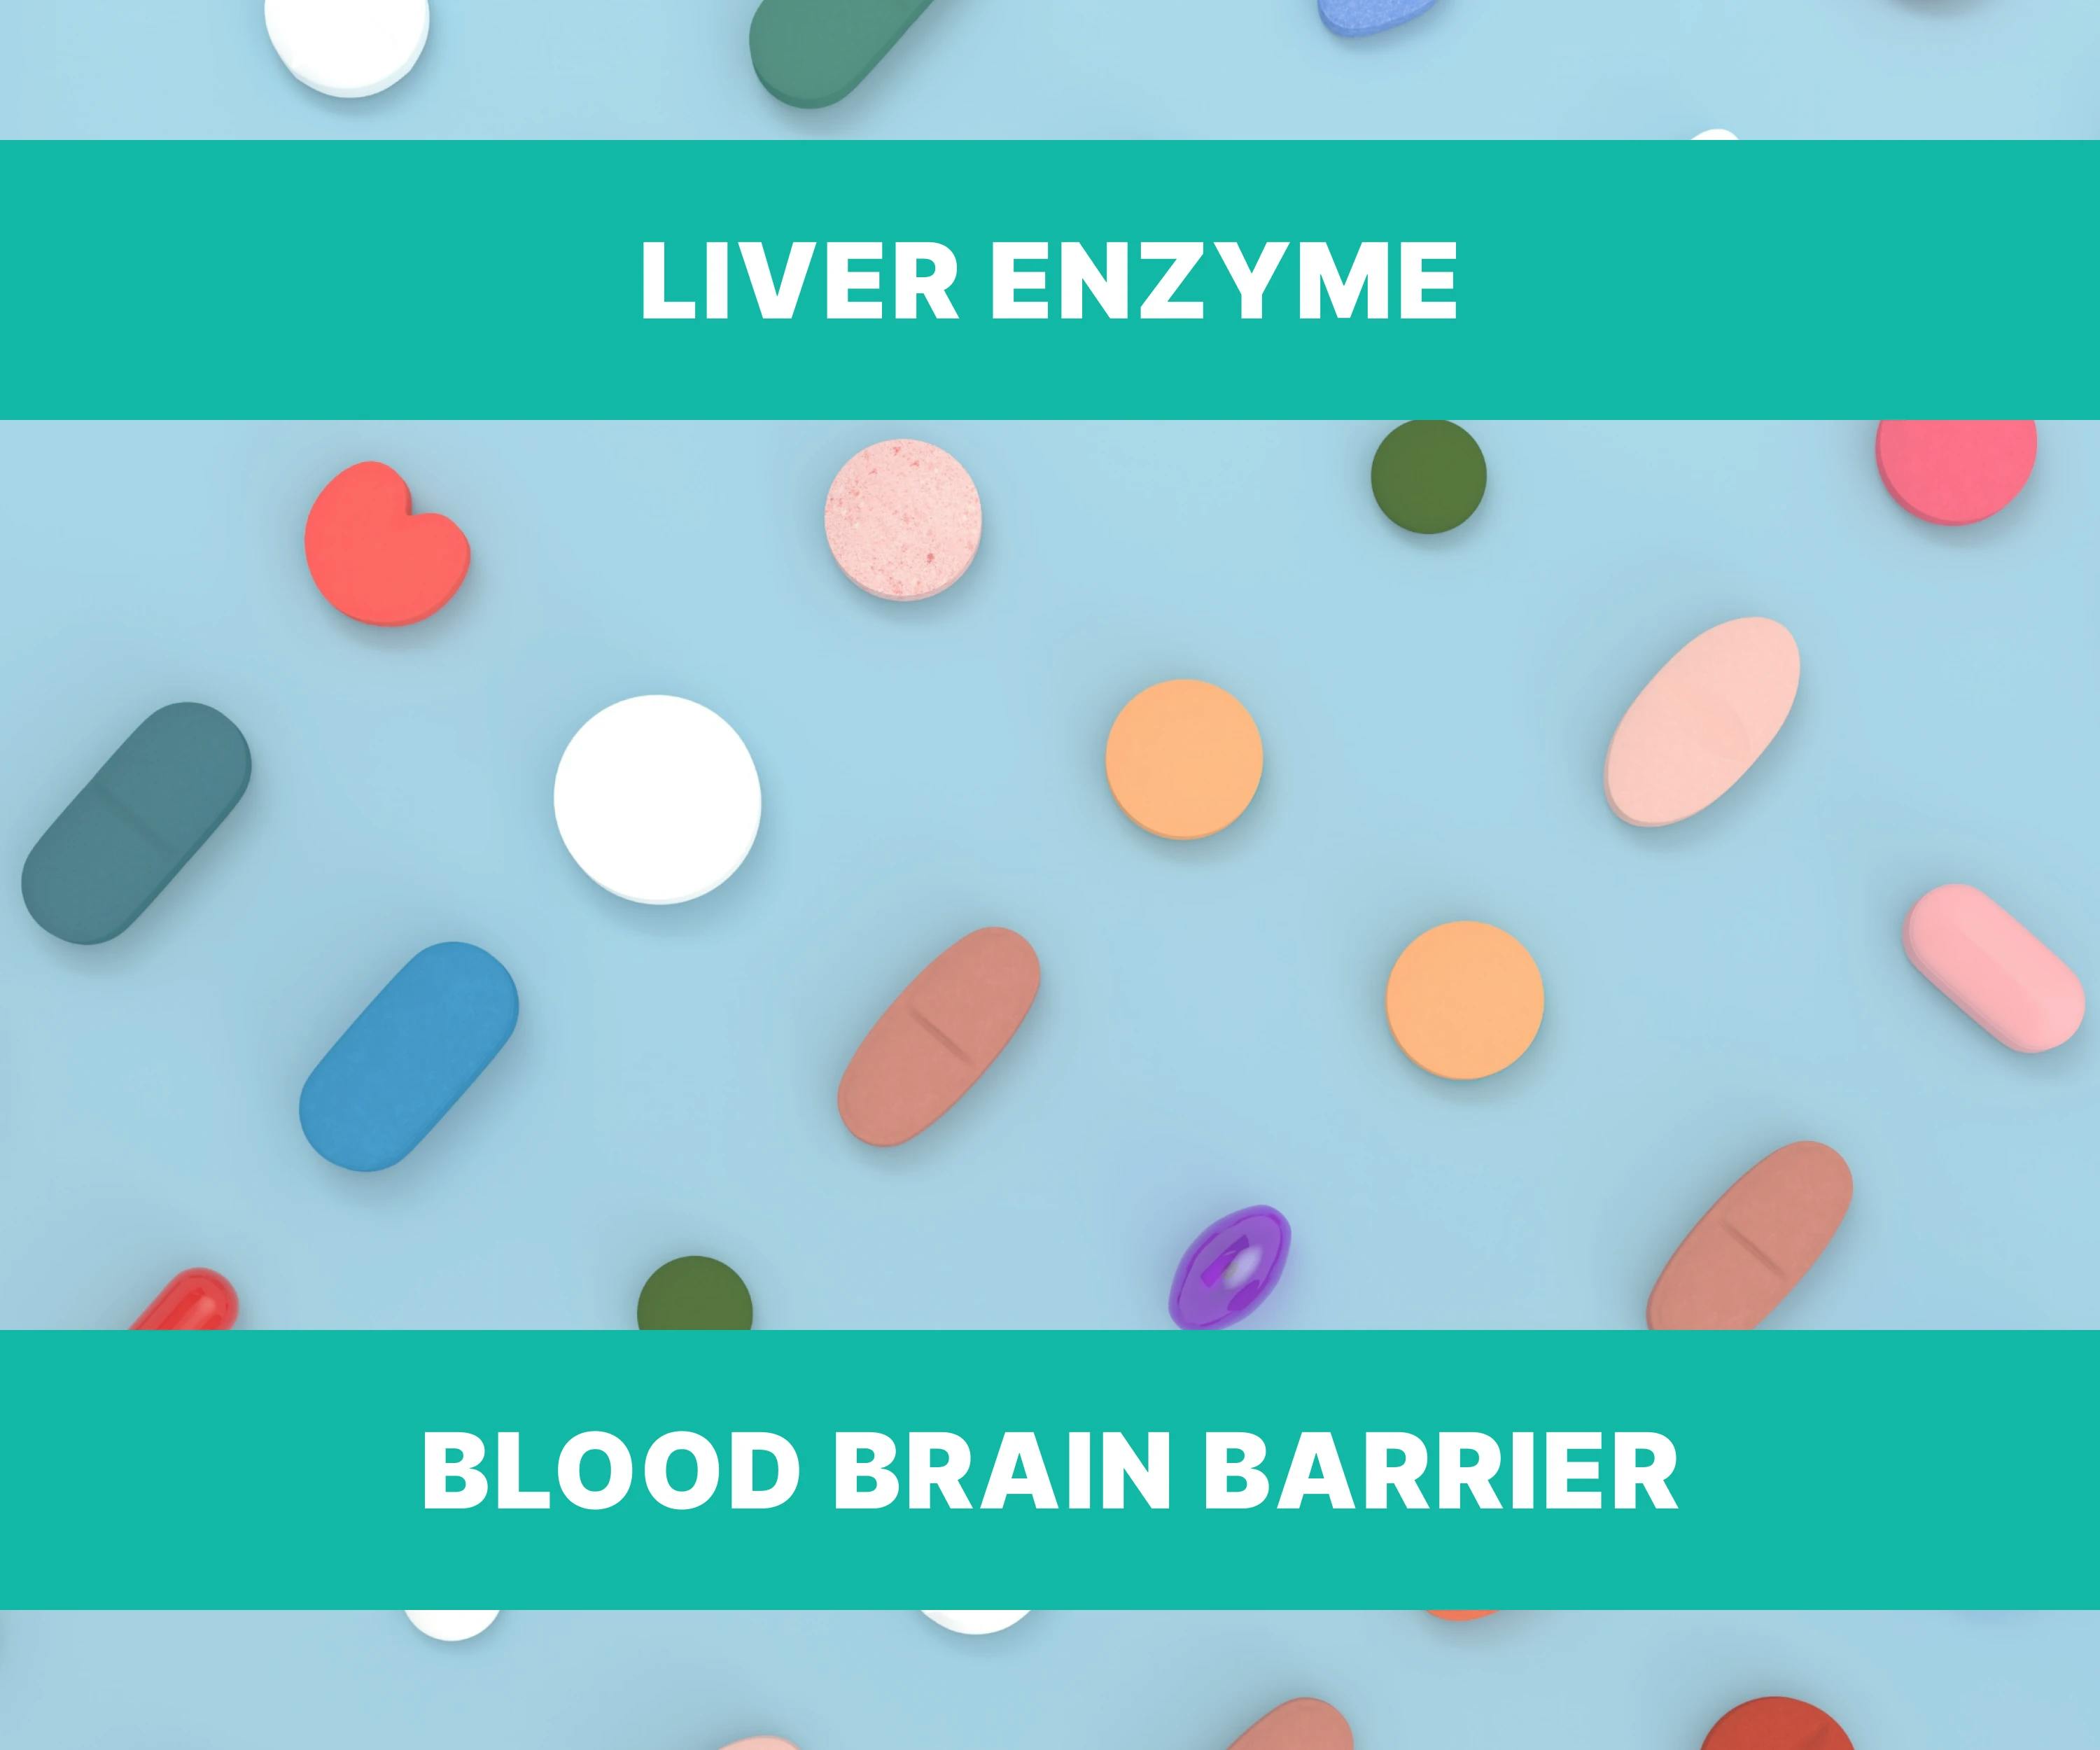 Learn about the liver enzyme, blood brain barrier